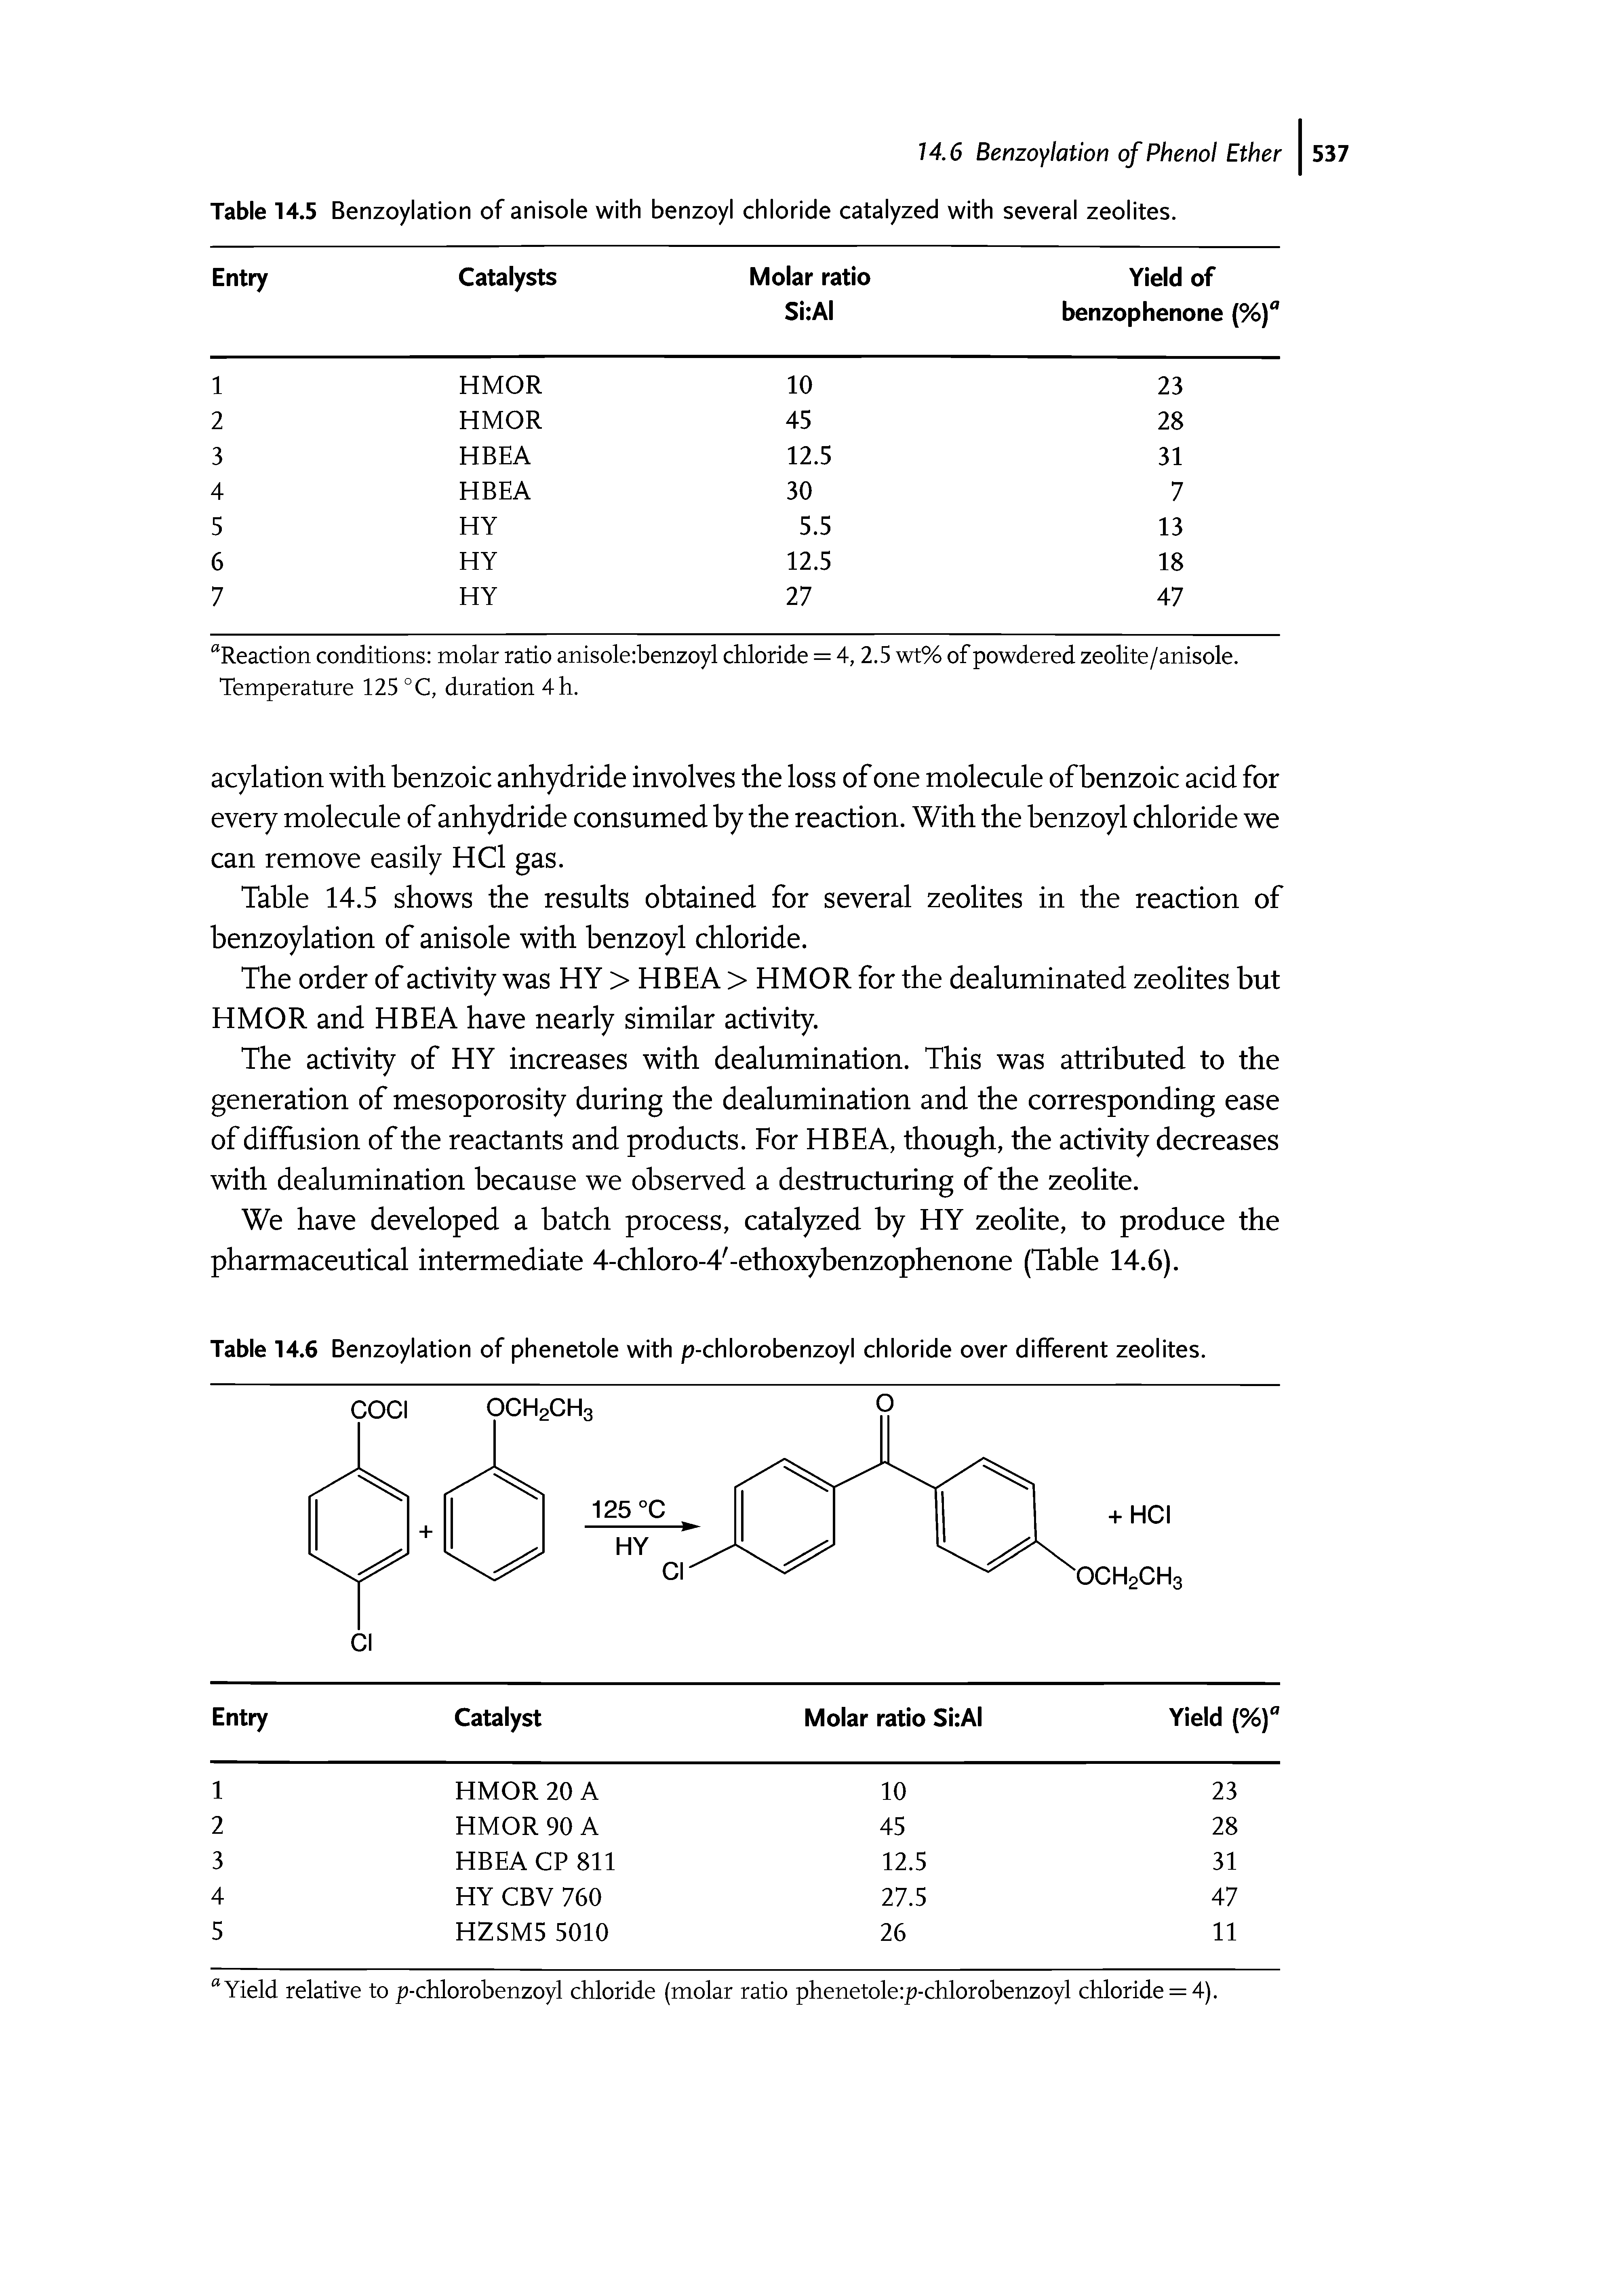 Table 14.5 Benzoylation of anisole with benzoyl chloride catalyzed with several zeolites.